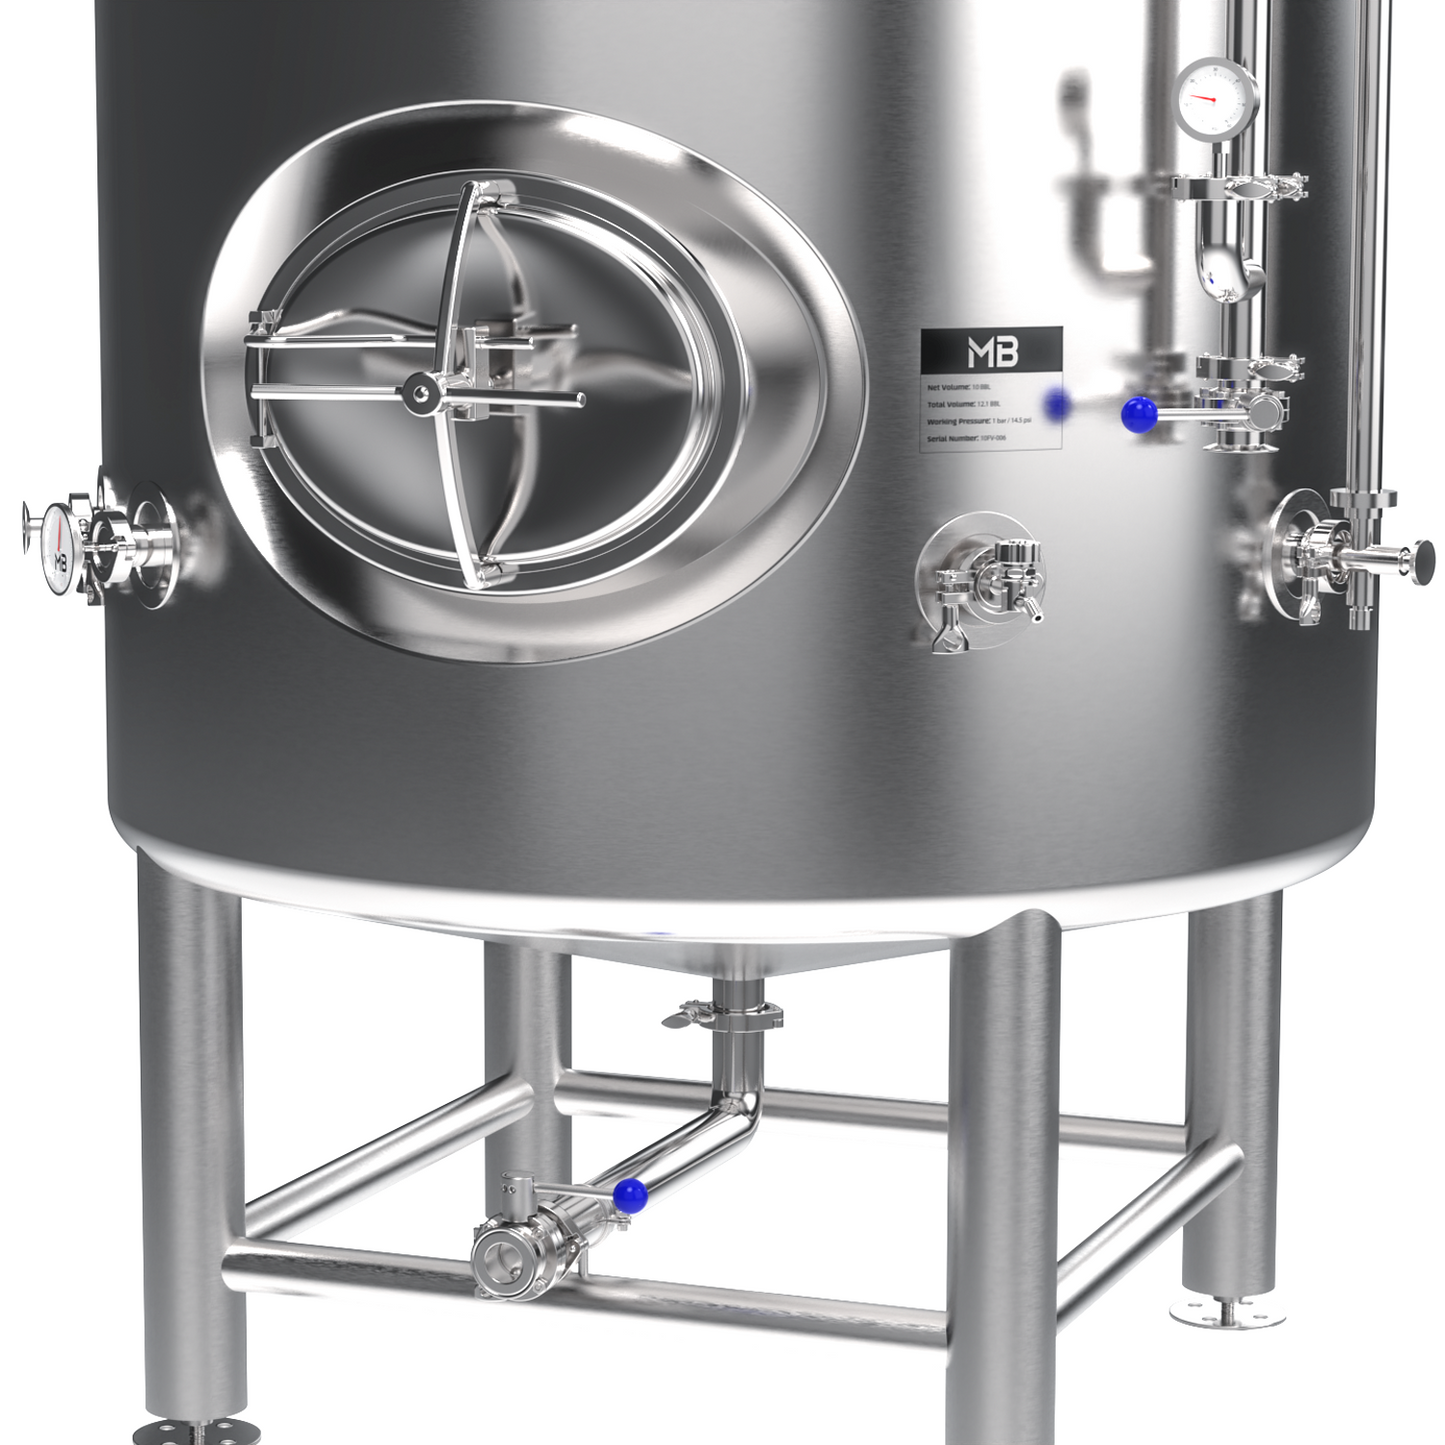 Brite Tank | Jacketed  | 7 bbl